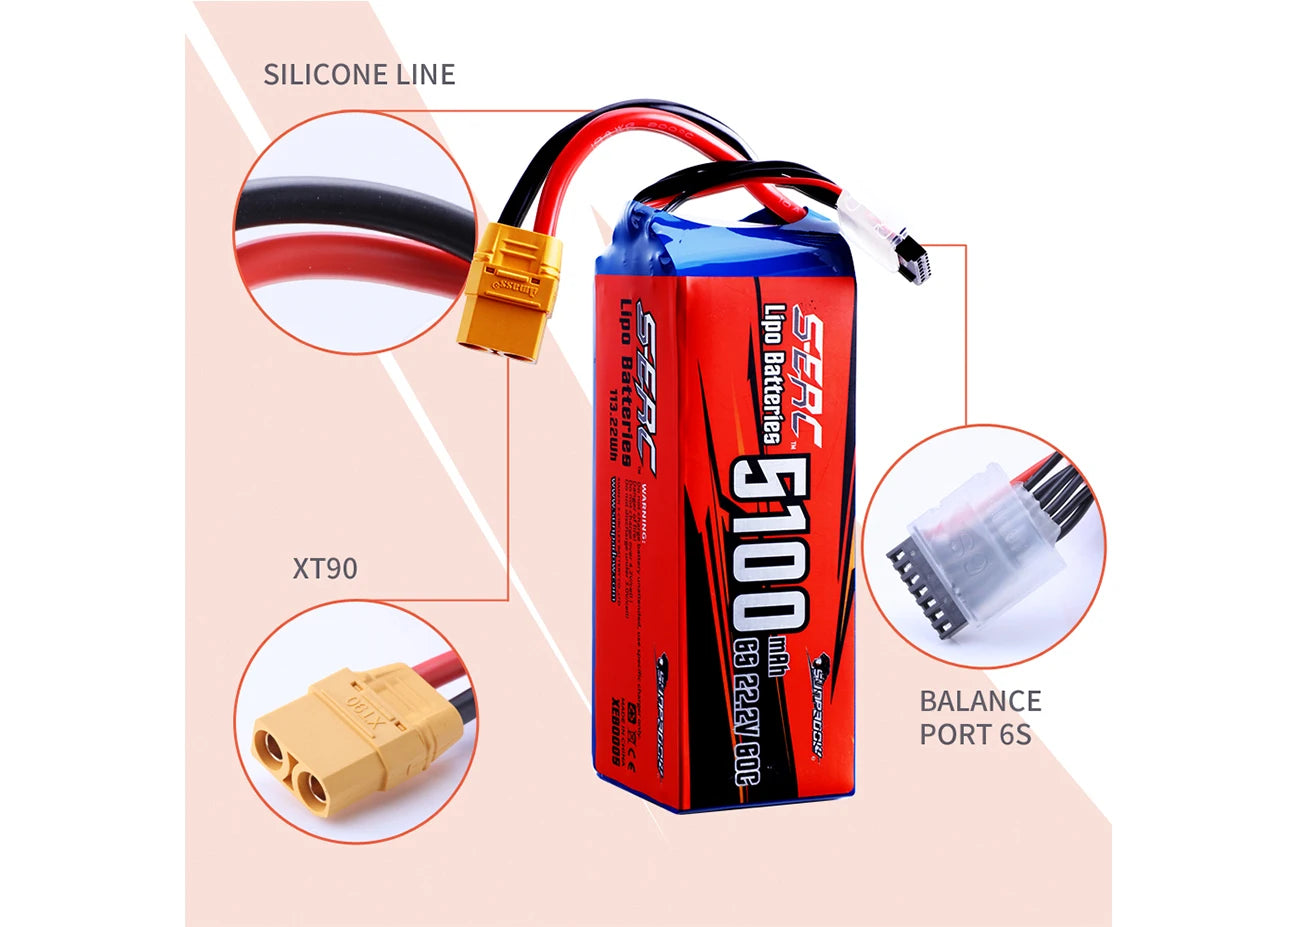 Sunpadow RC 3S 4S 6S Lipo Battery 5100mAh, 2.Check the battery condition carefully before using or charging